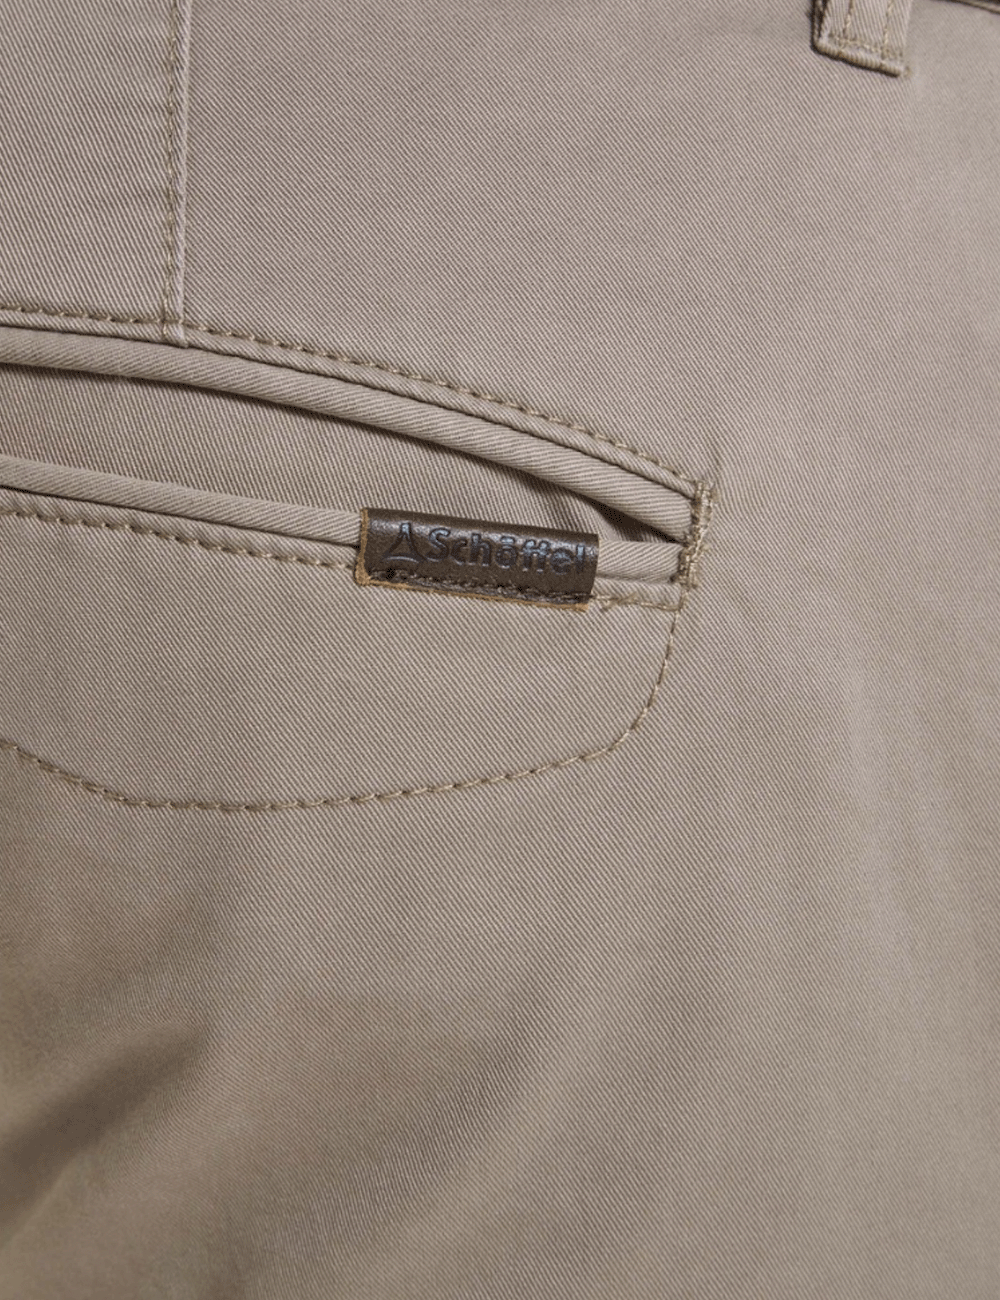 Close up of the Schoffel branded label on the Christopher Chino